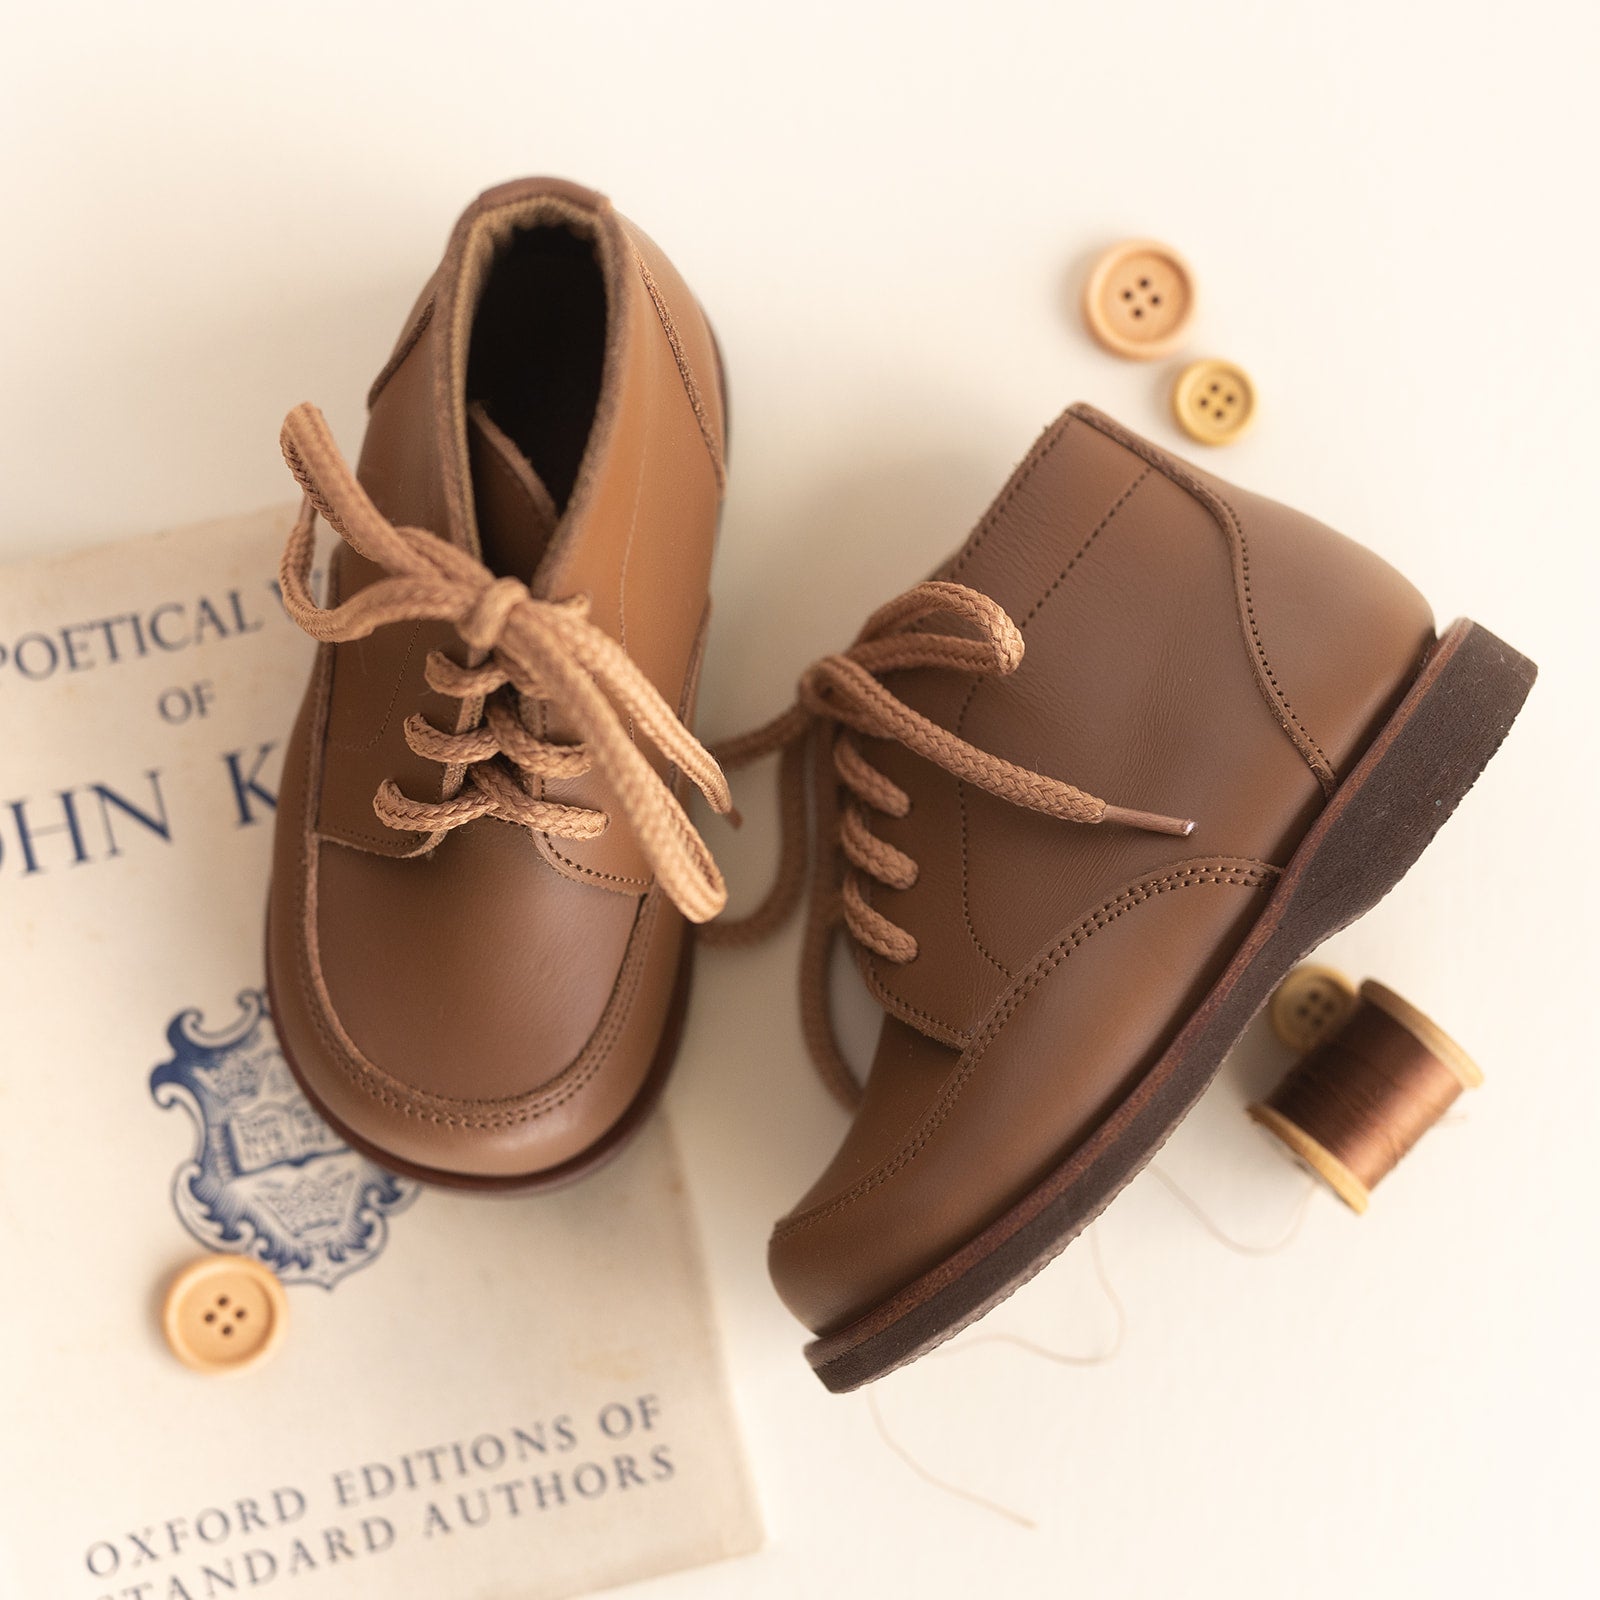 Adelisa & Co. Vintage style leather boots for children. Our Antigua leather boots come in a medium brown leather and feature a simplistic design with a round toe. Unisex style